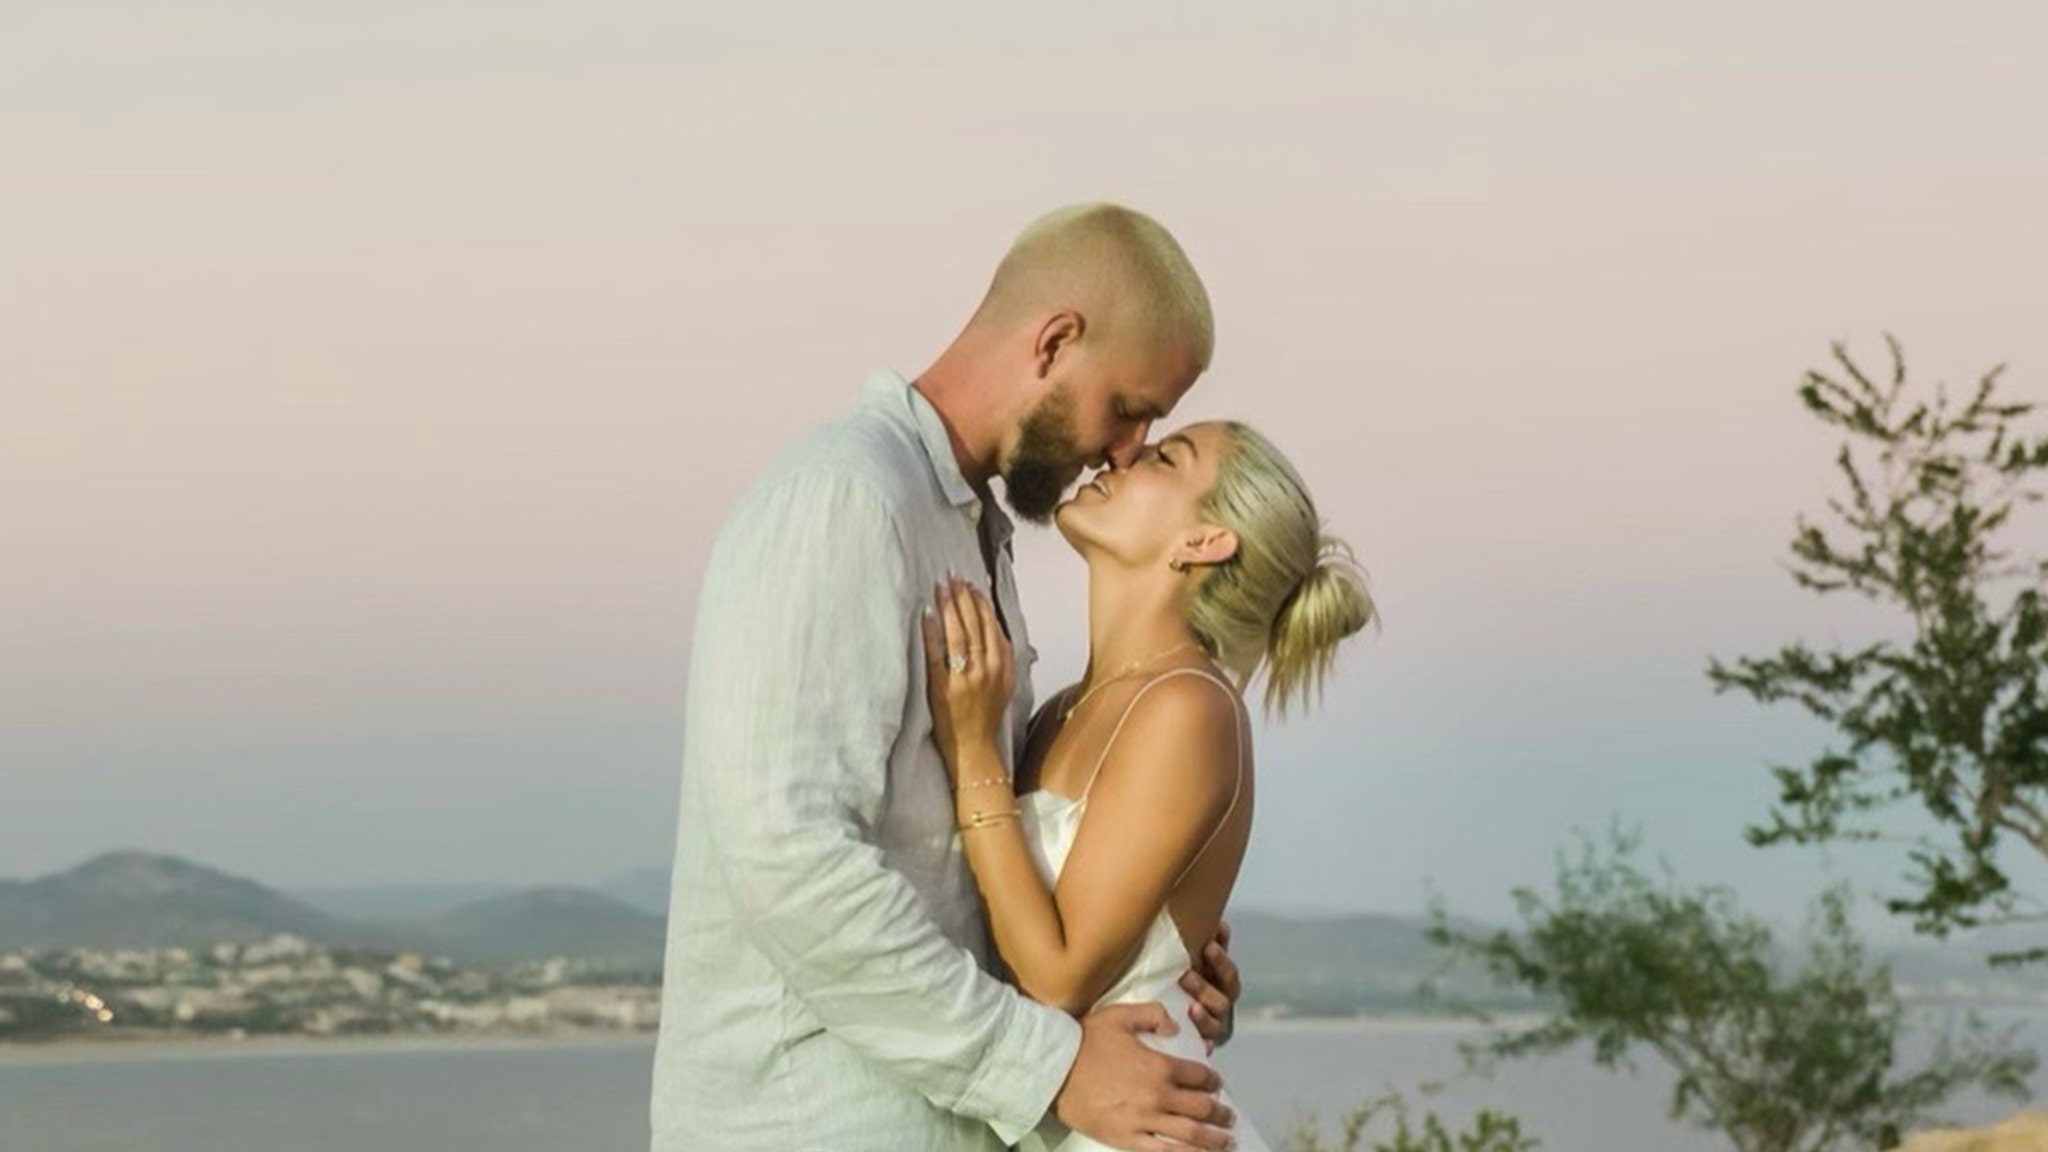 NBA's Chandler Parsons Engaged to Haylee Harrison, Check Out The Massive Ring!